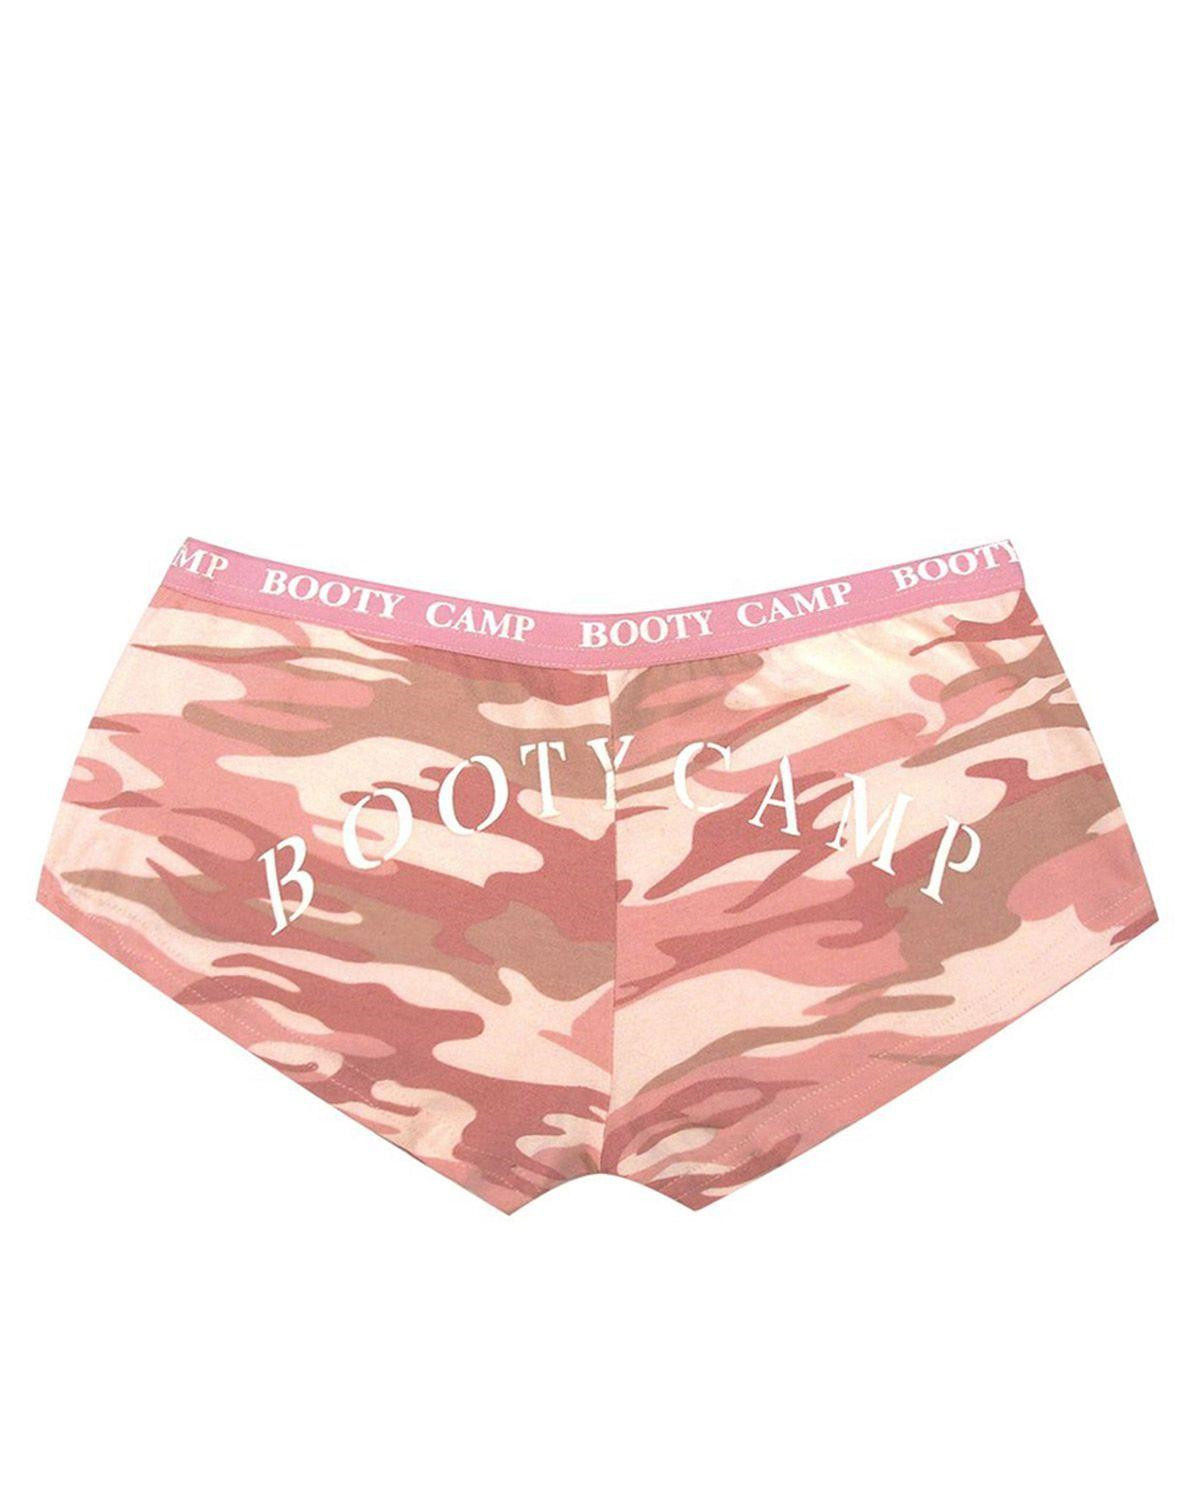 Rothco Trusser - 'Booty Camp' (Pink Camo, S)